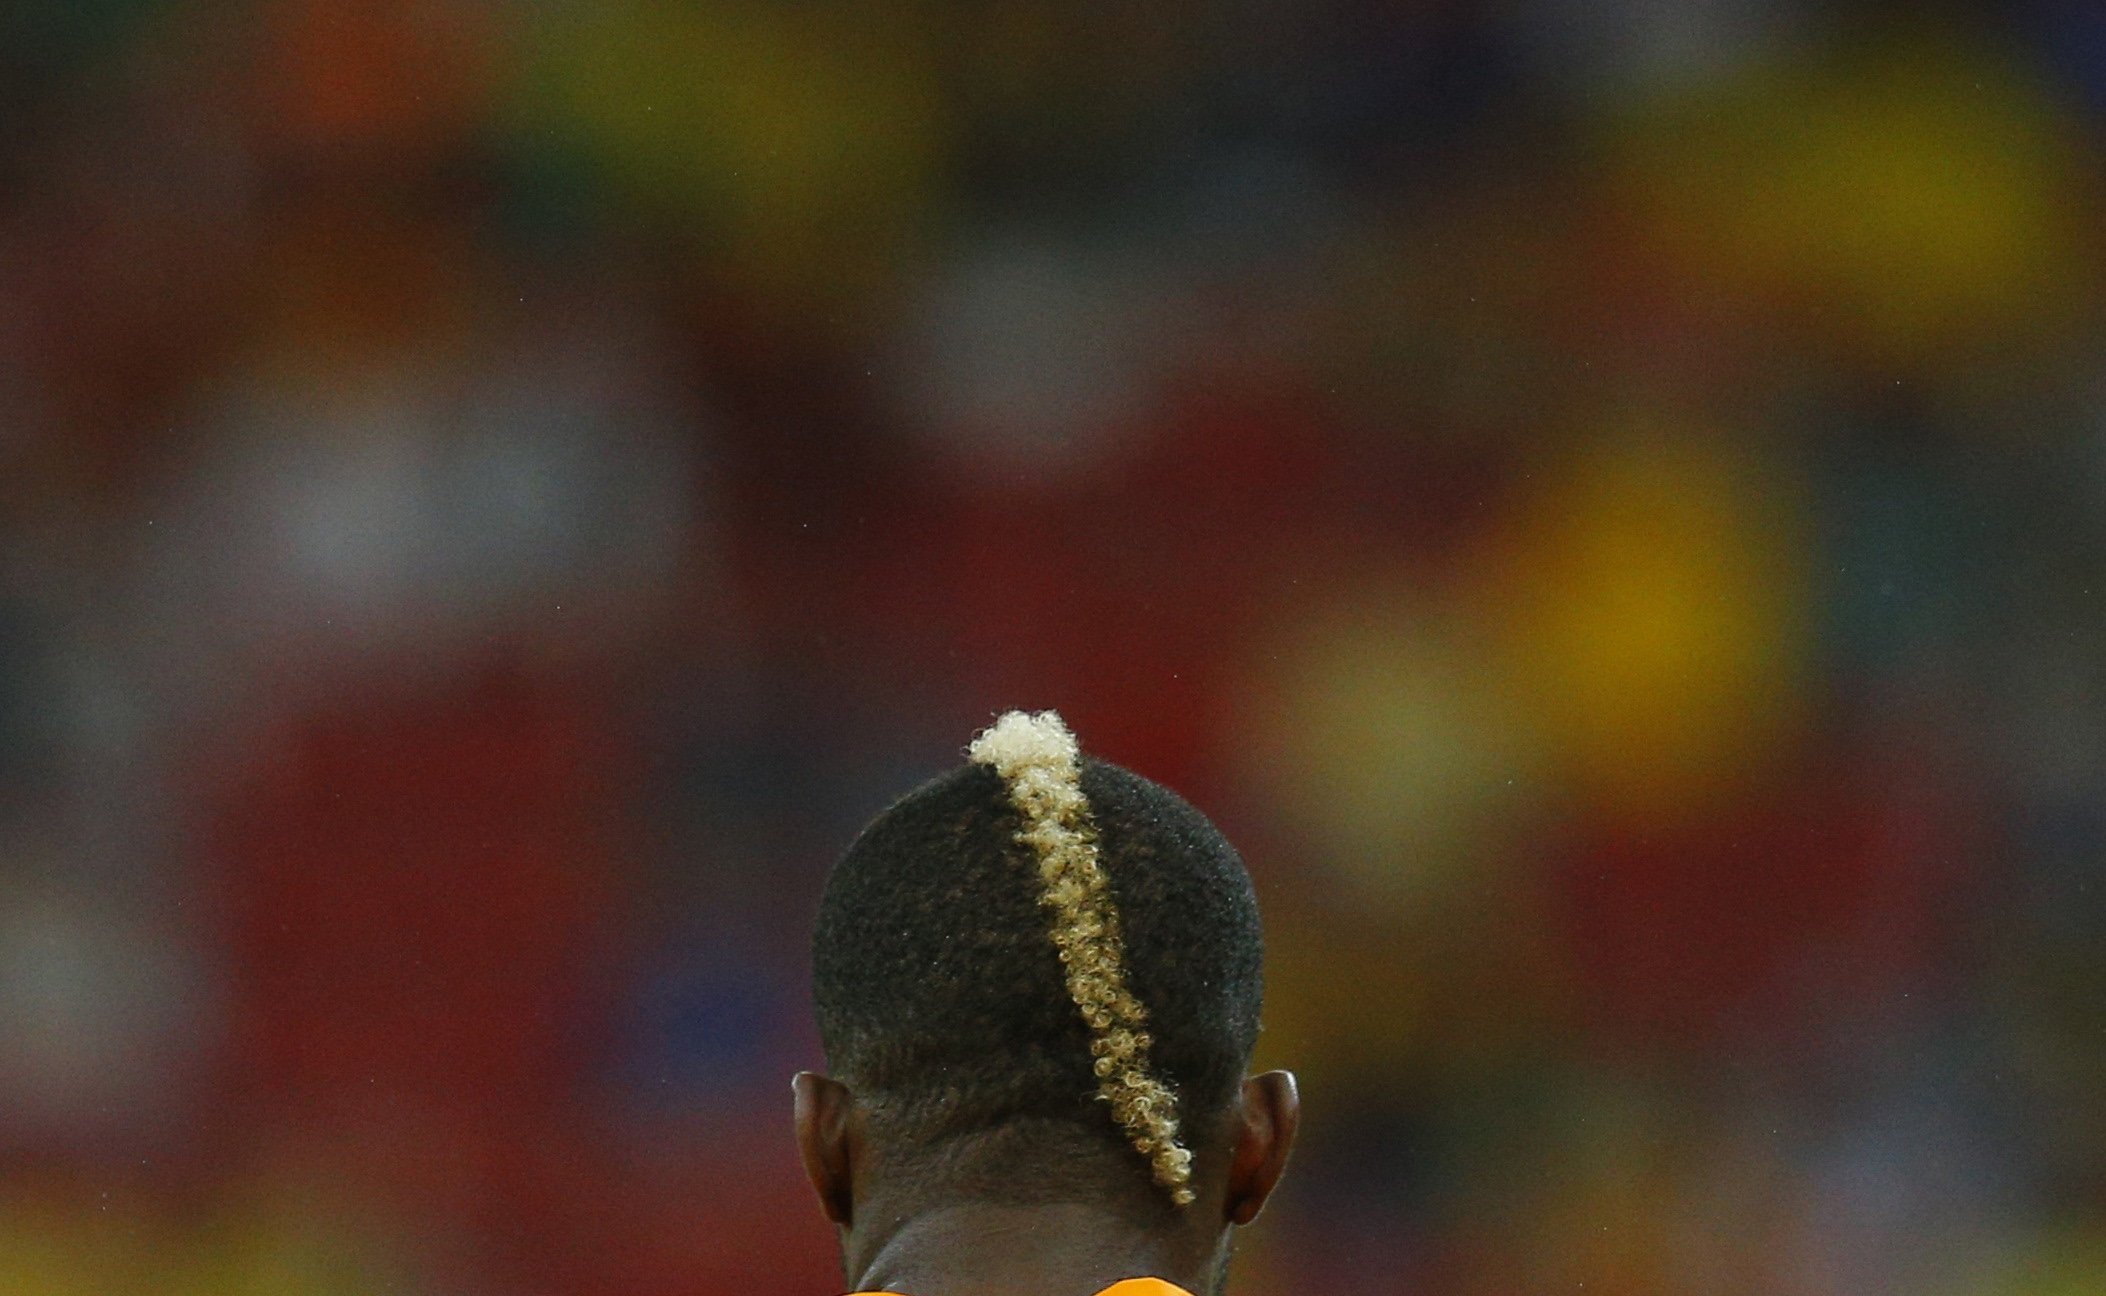 Ivory Coast's Geoffroy Serey Die is seen from the back during their match against Japan at the Pernambuco arena in Recife, Brazil on June 14, 2014.